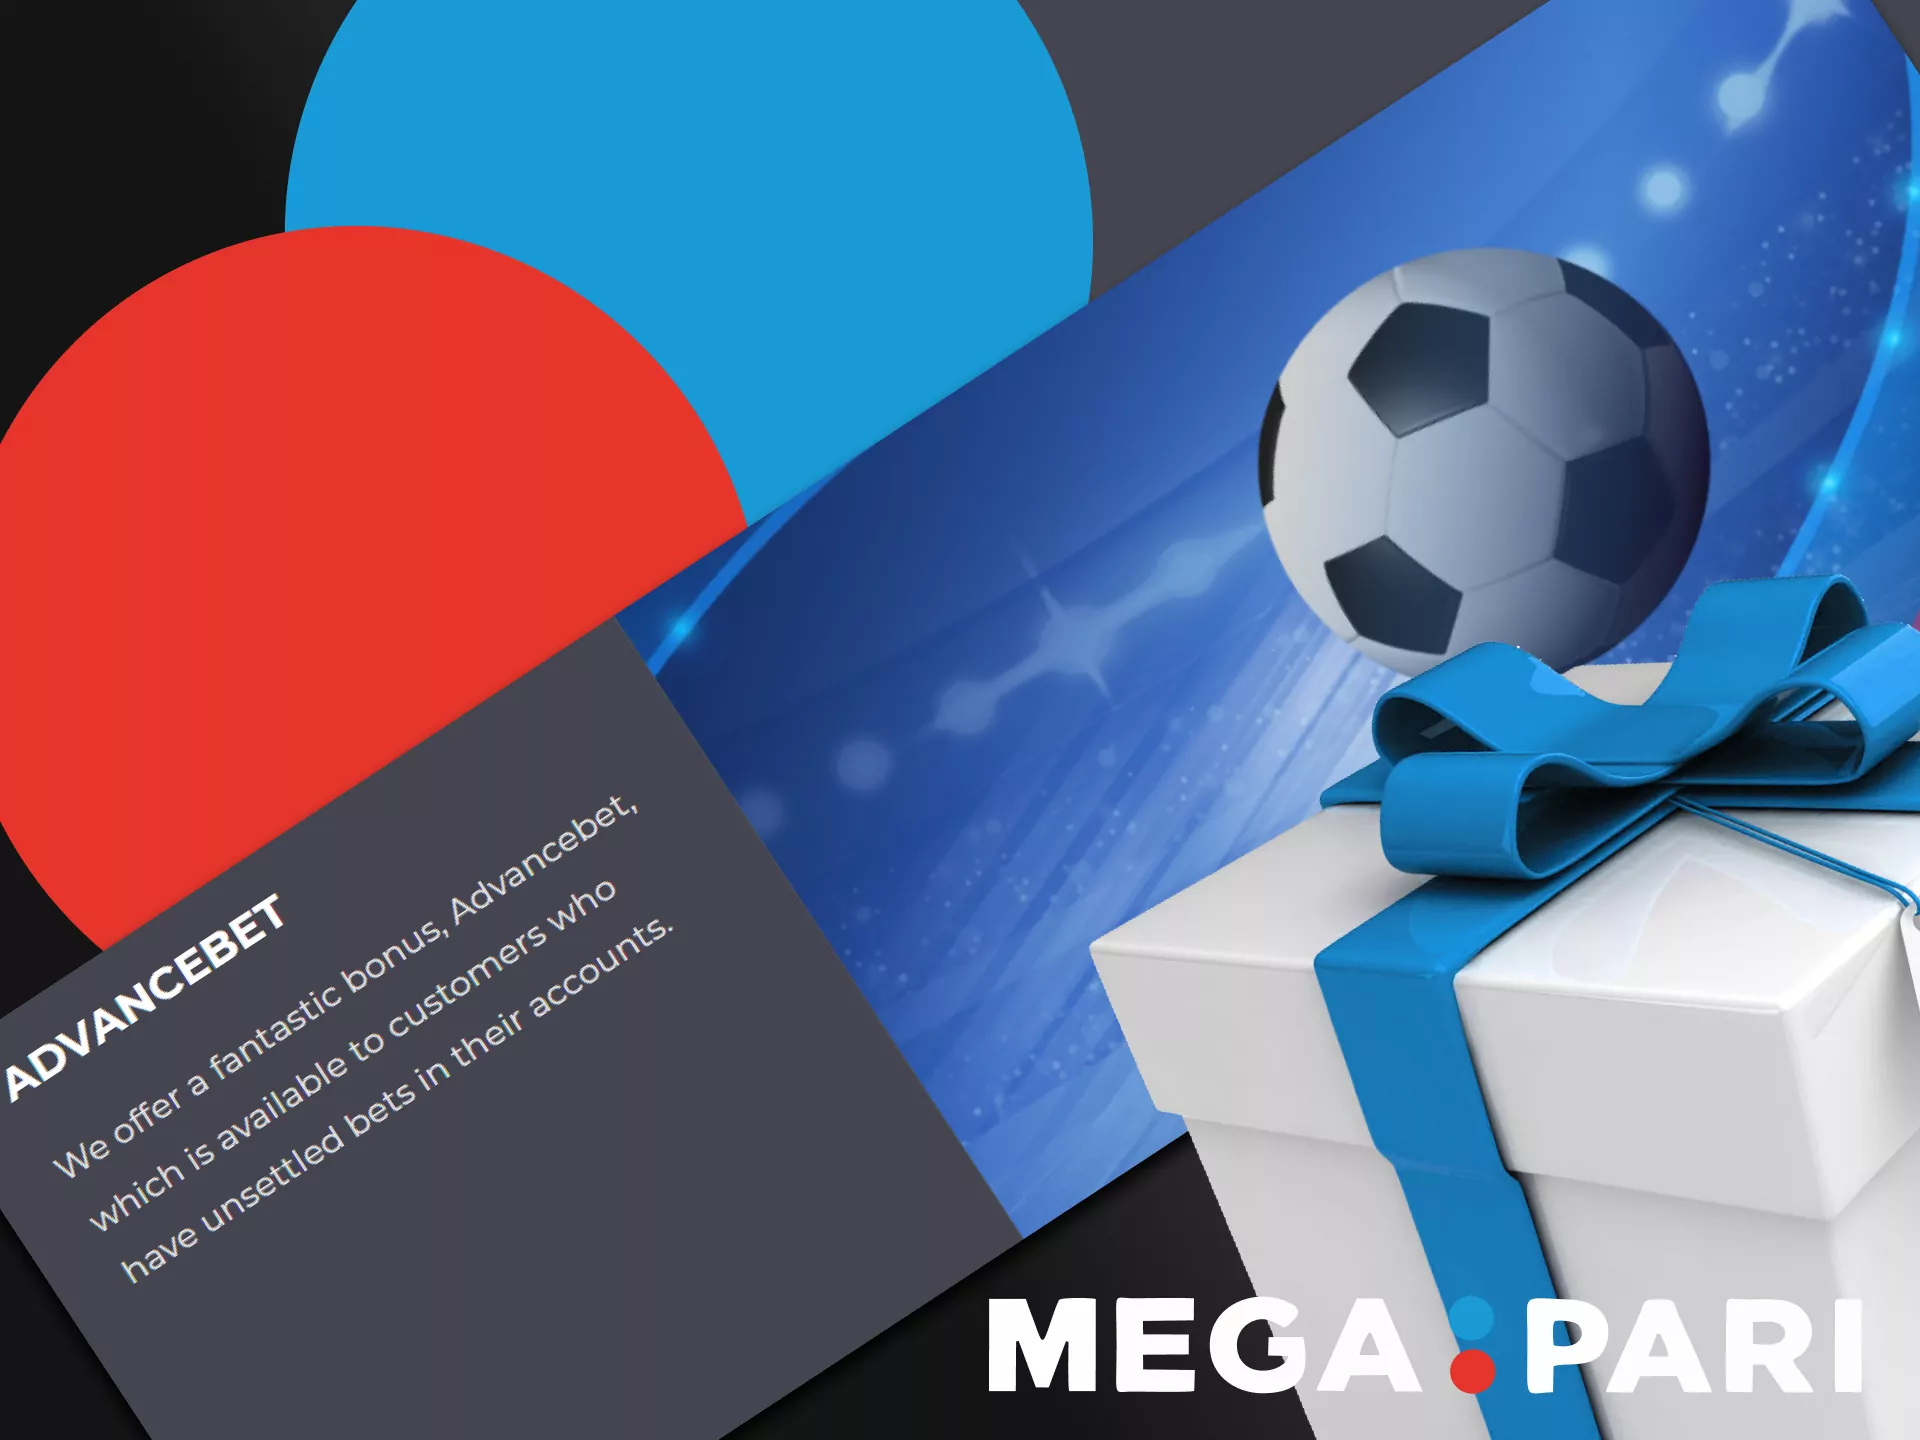 A special Megapari bonus for players who like to place bets and then pay for them.